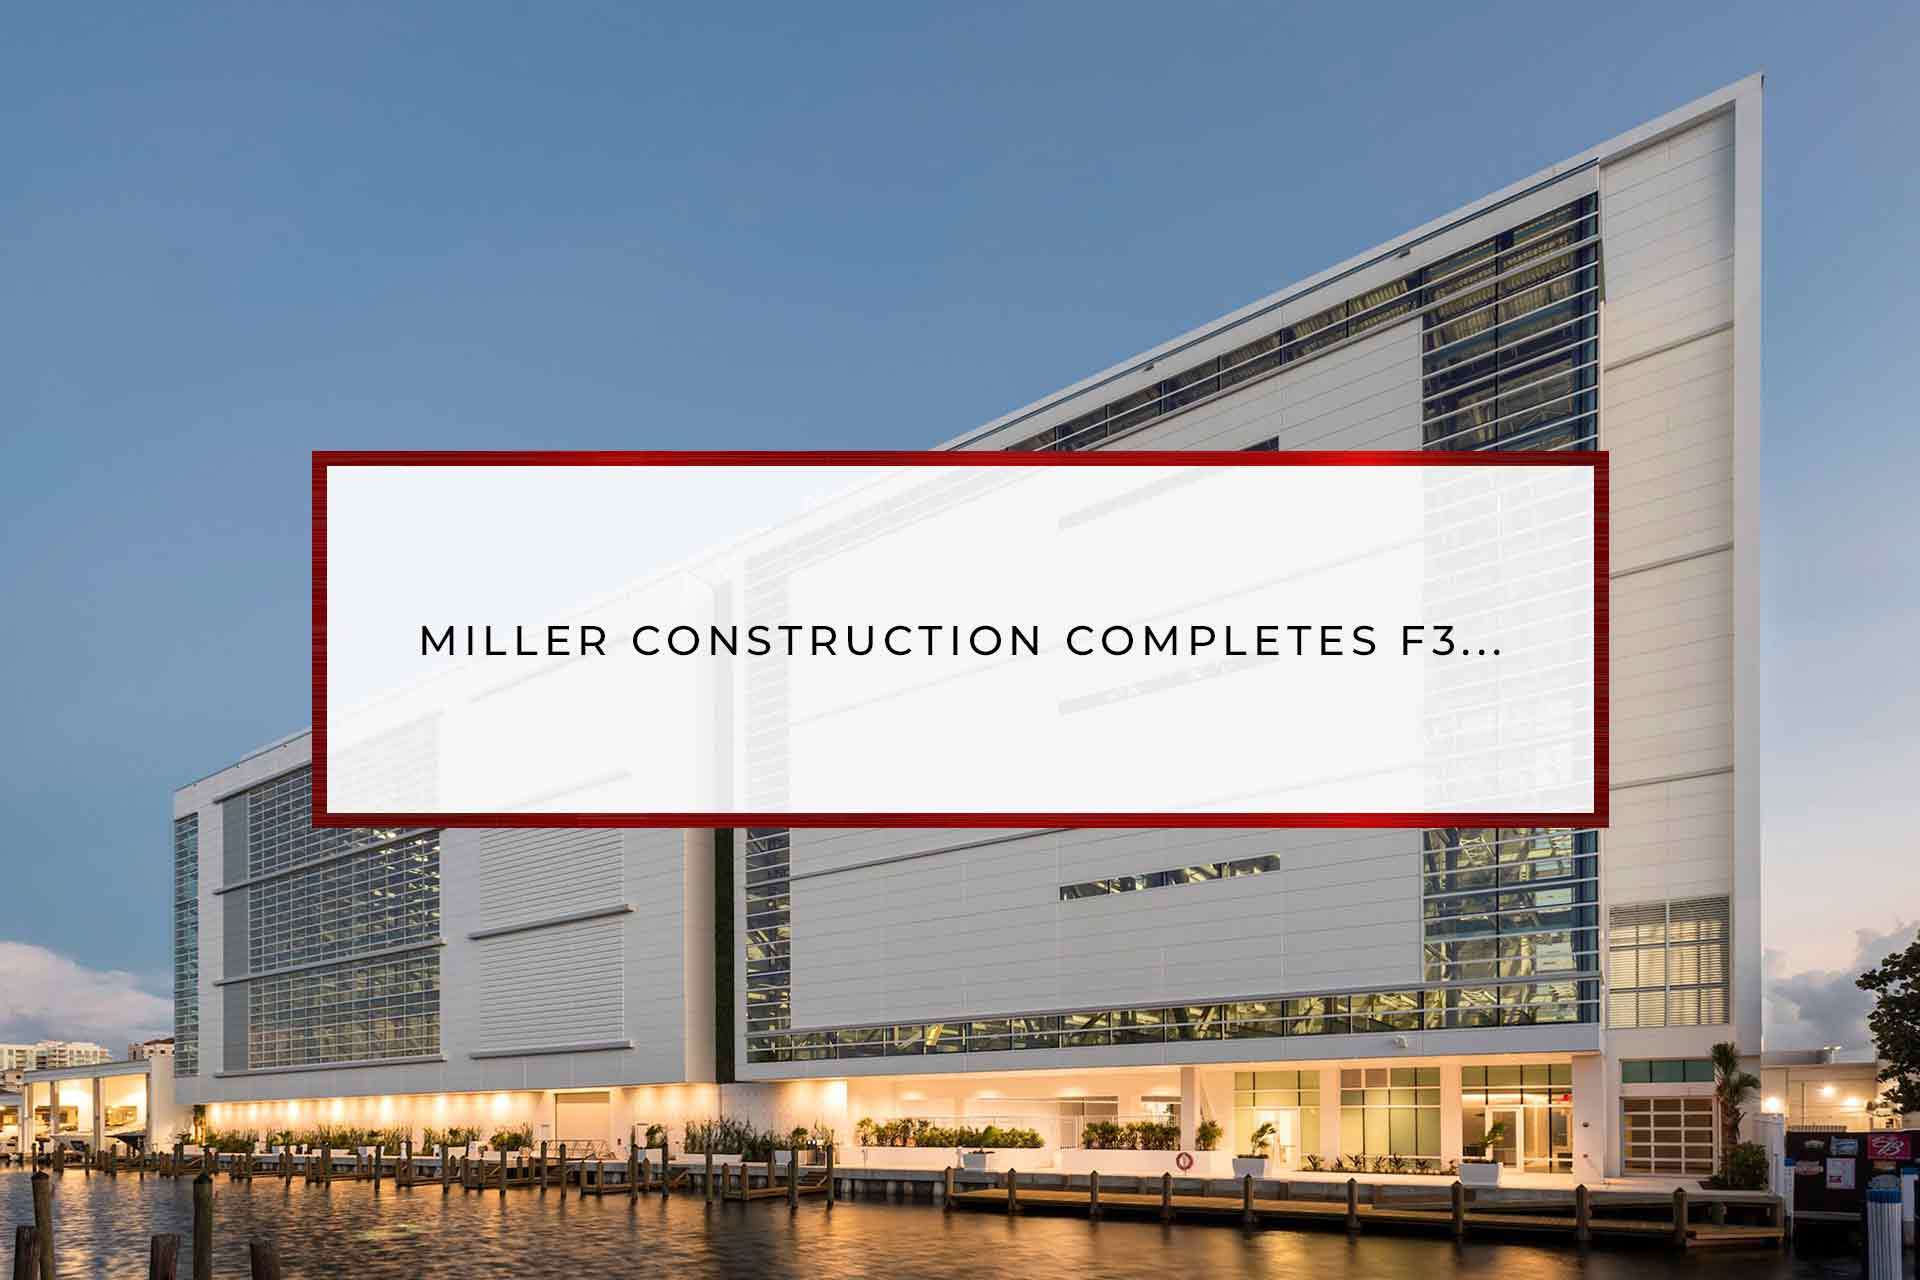 Miller Construction Completes F3 Marina, Fort Lauderdale, Second Fully Automated Drystack Marina of its Kind in U.S.